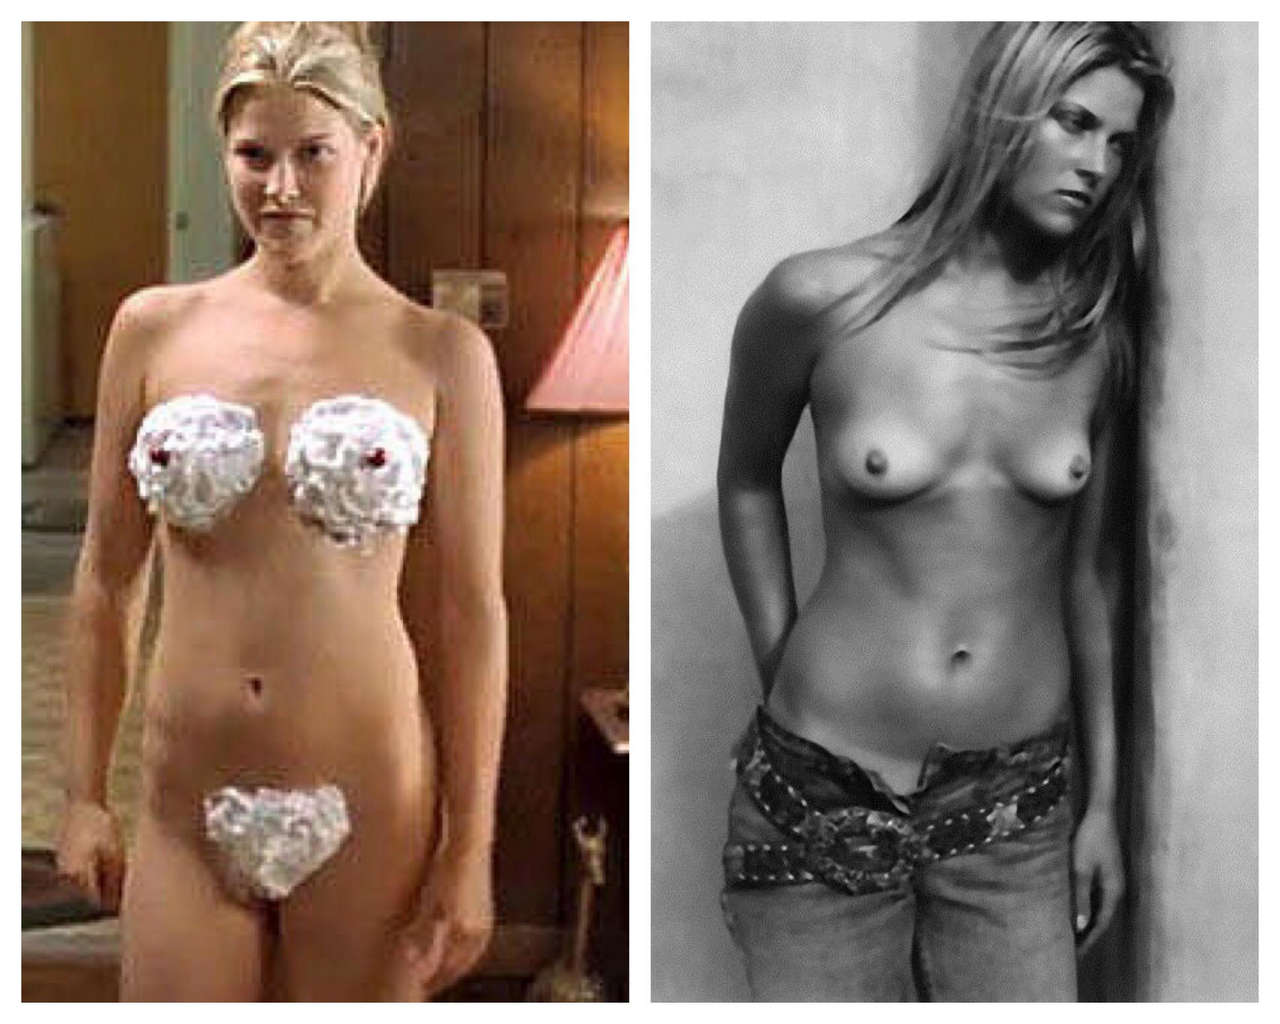 Ali Larter With The Whipped Cream Bikini And Without NSF